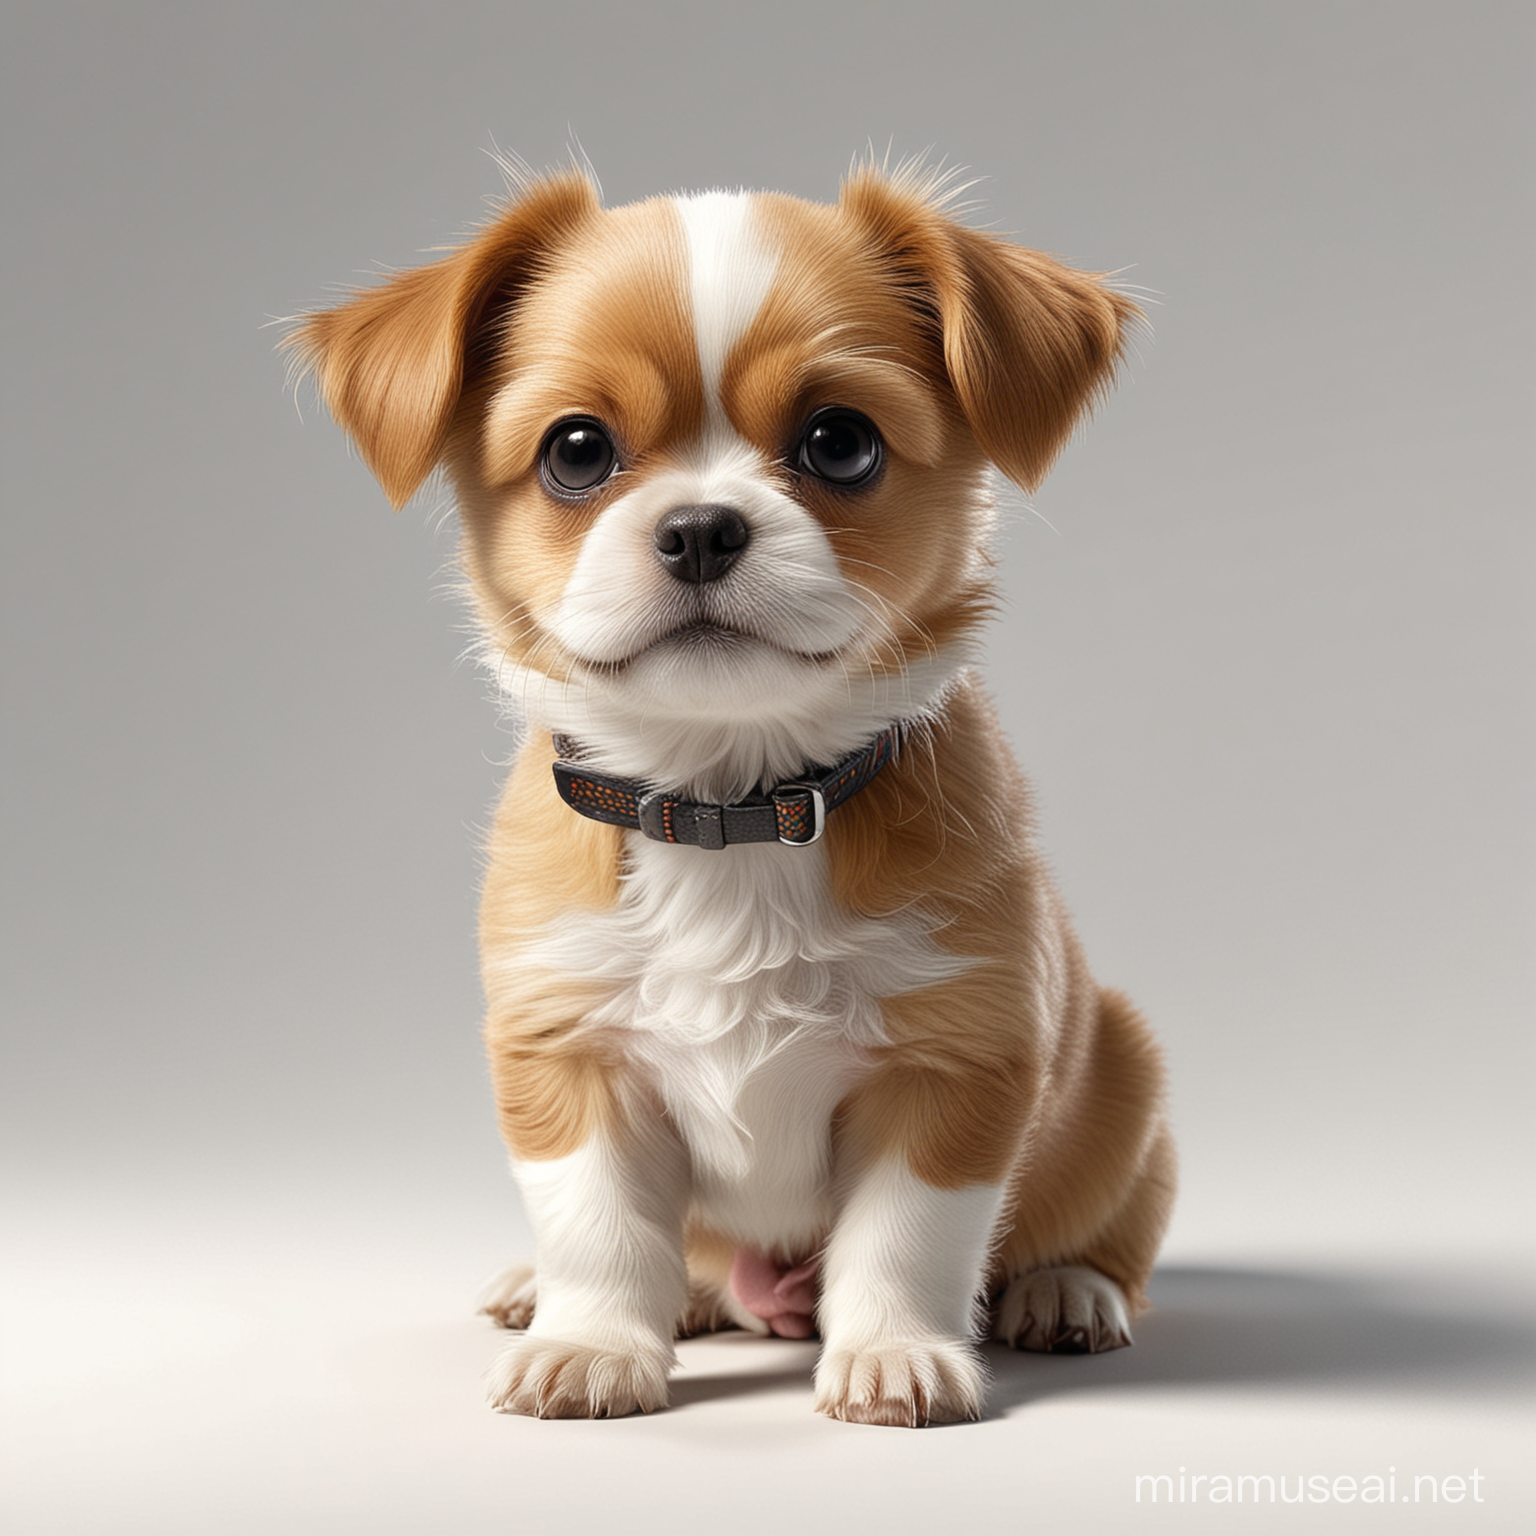 hyper realistic cute small dog sitting up with slight shadow, white background, 45 degree angle and slightly raised camera angle